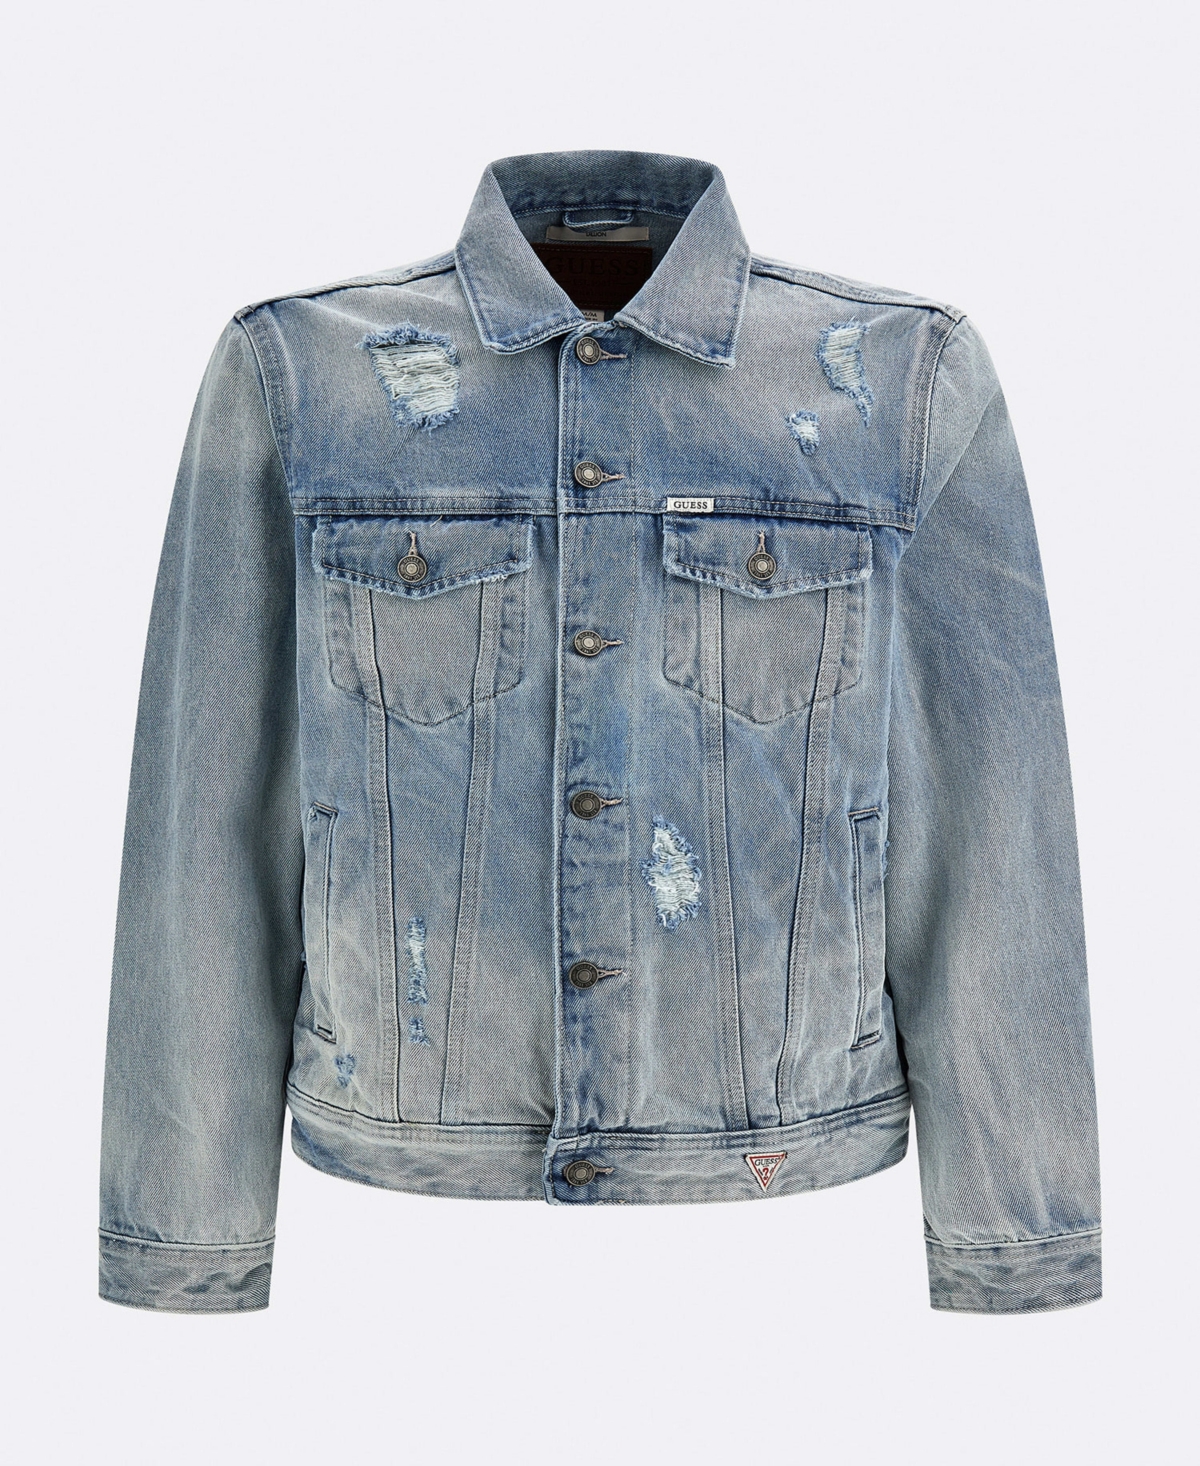 Guess Men's Eco Dillon Jacket In Light Wash